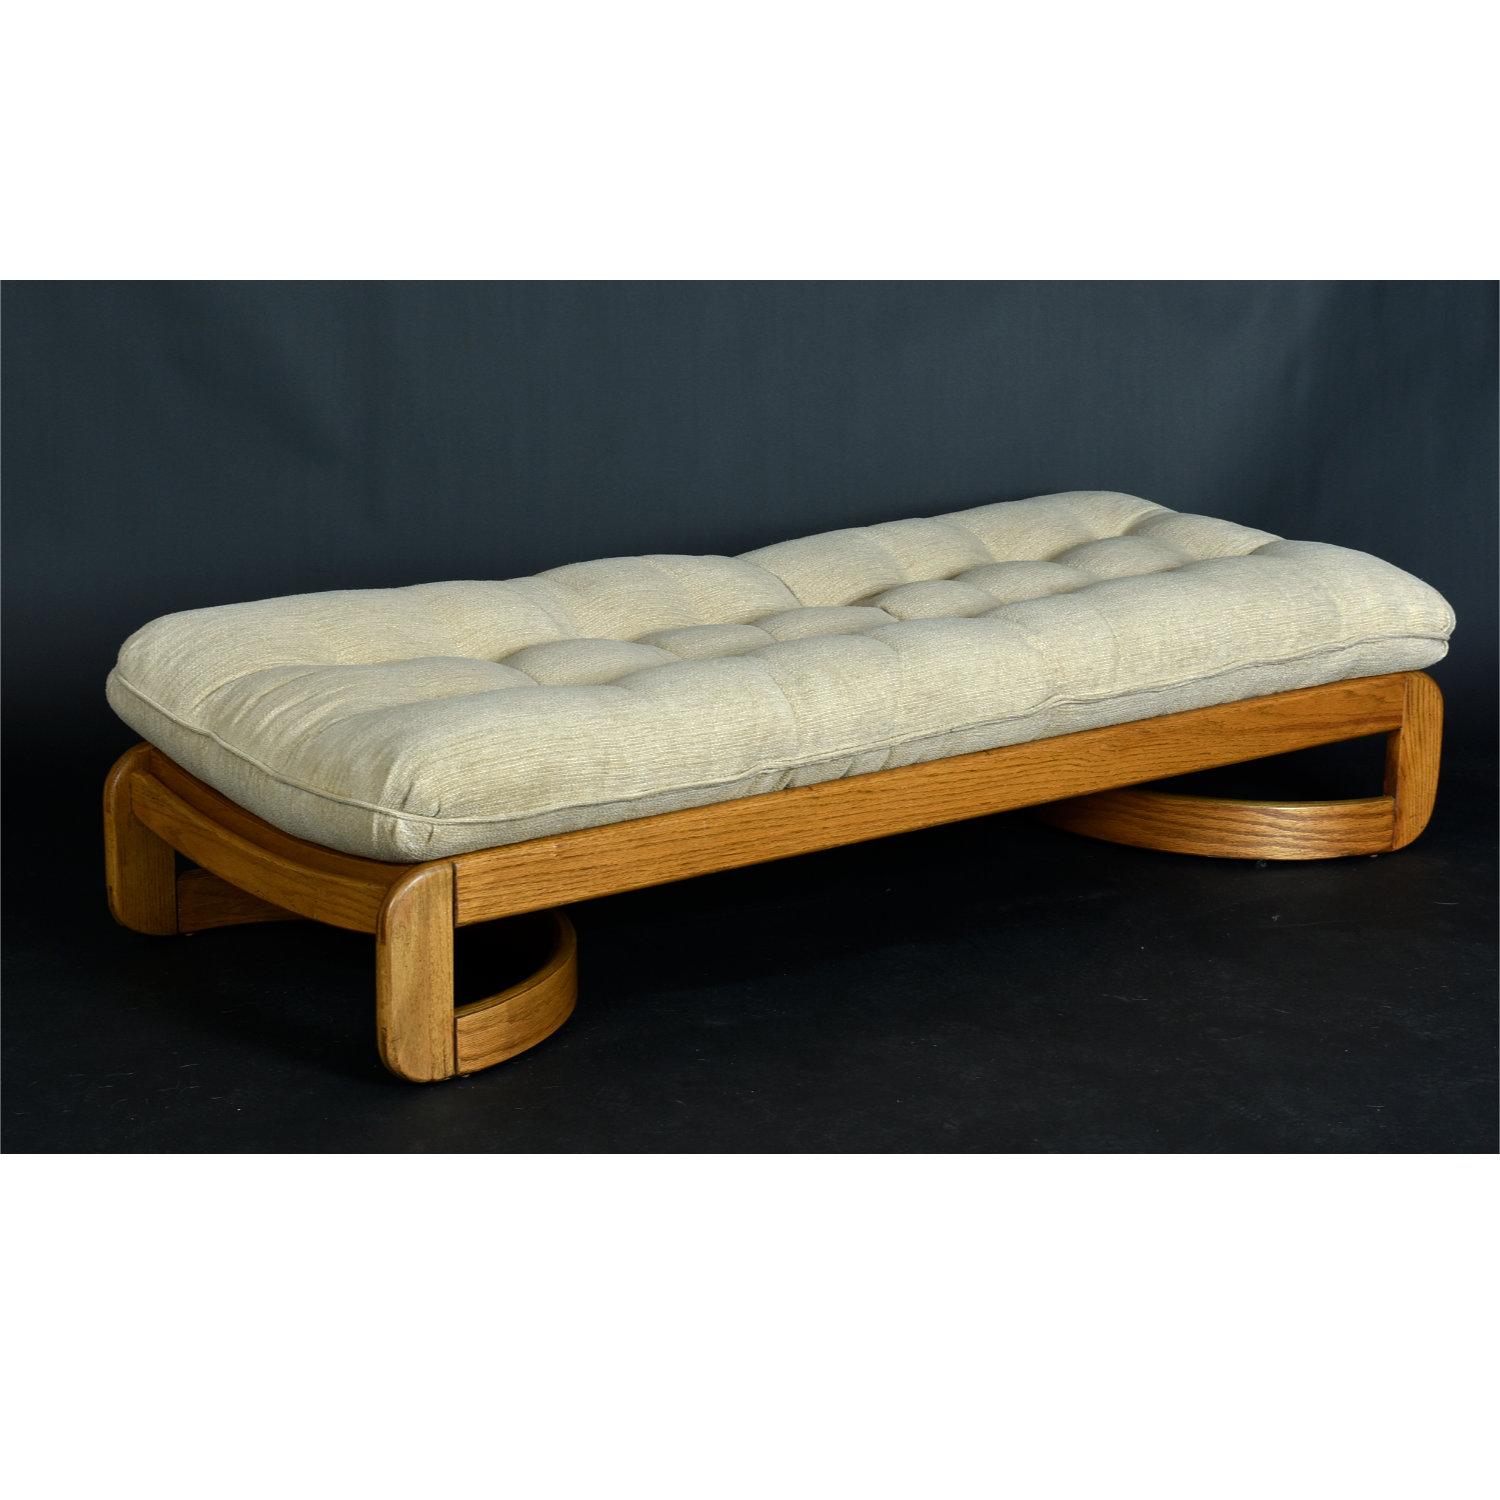 Incredibly versatile indoor chaise lounge by Howard Furniture. We’ve had a few pieces from Howard in the past, and this chaise is always a hit. This particular line by Howard is crafted solid oak. This is the old growth, American grown, American